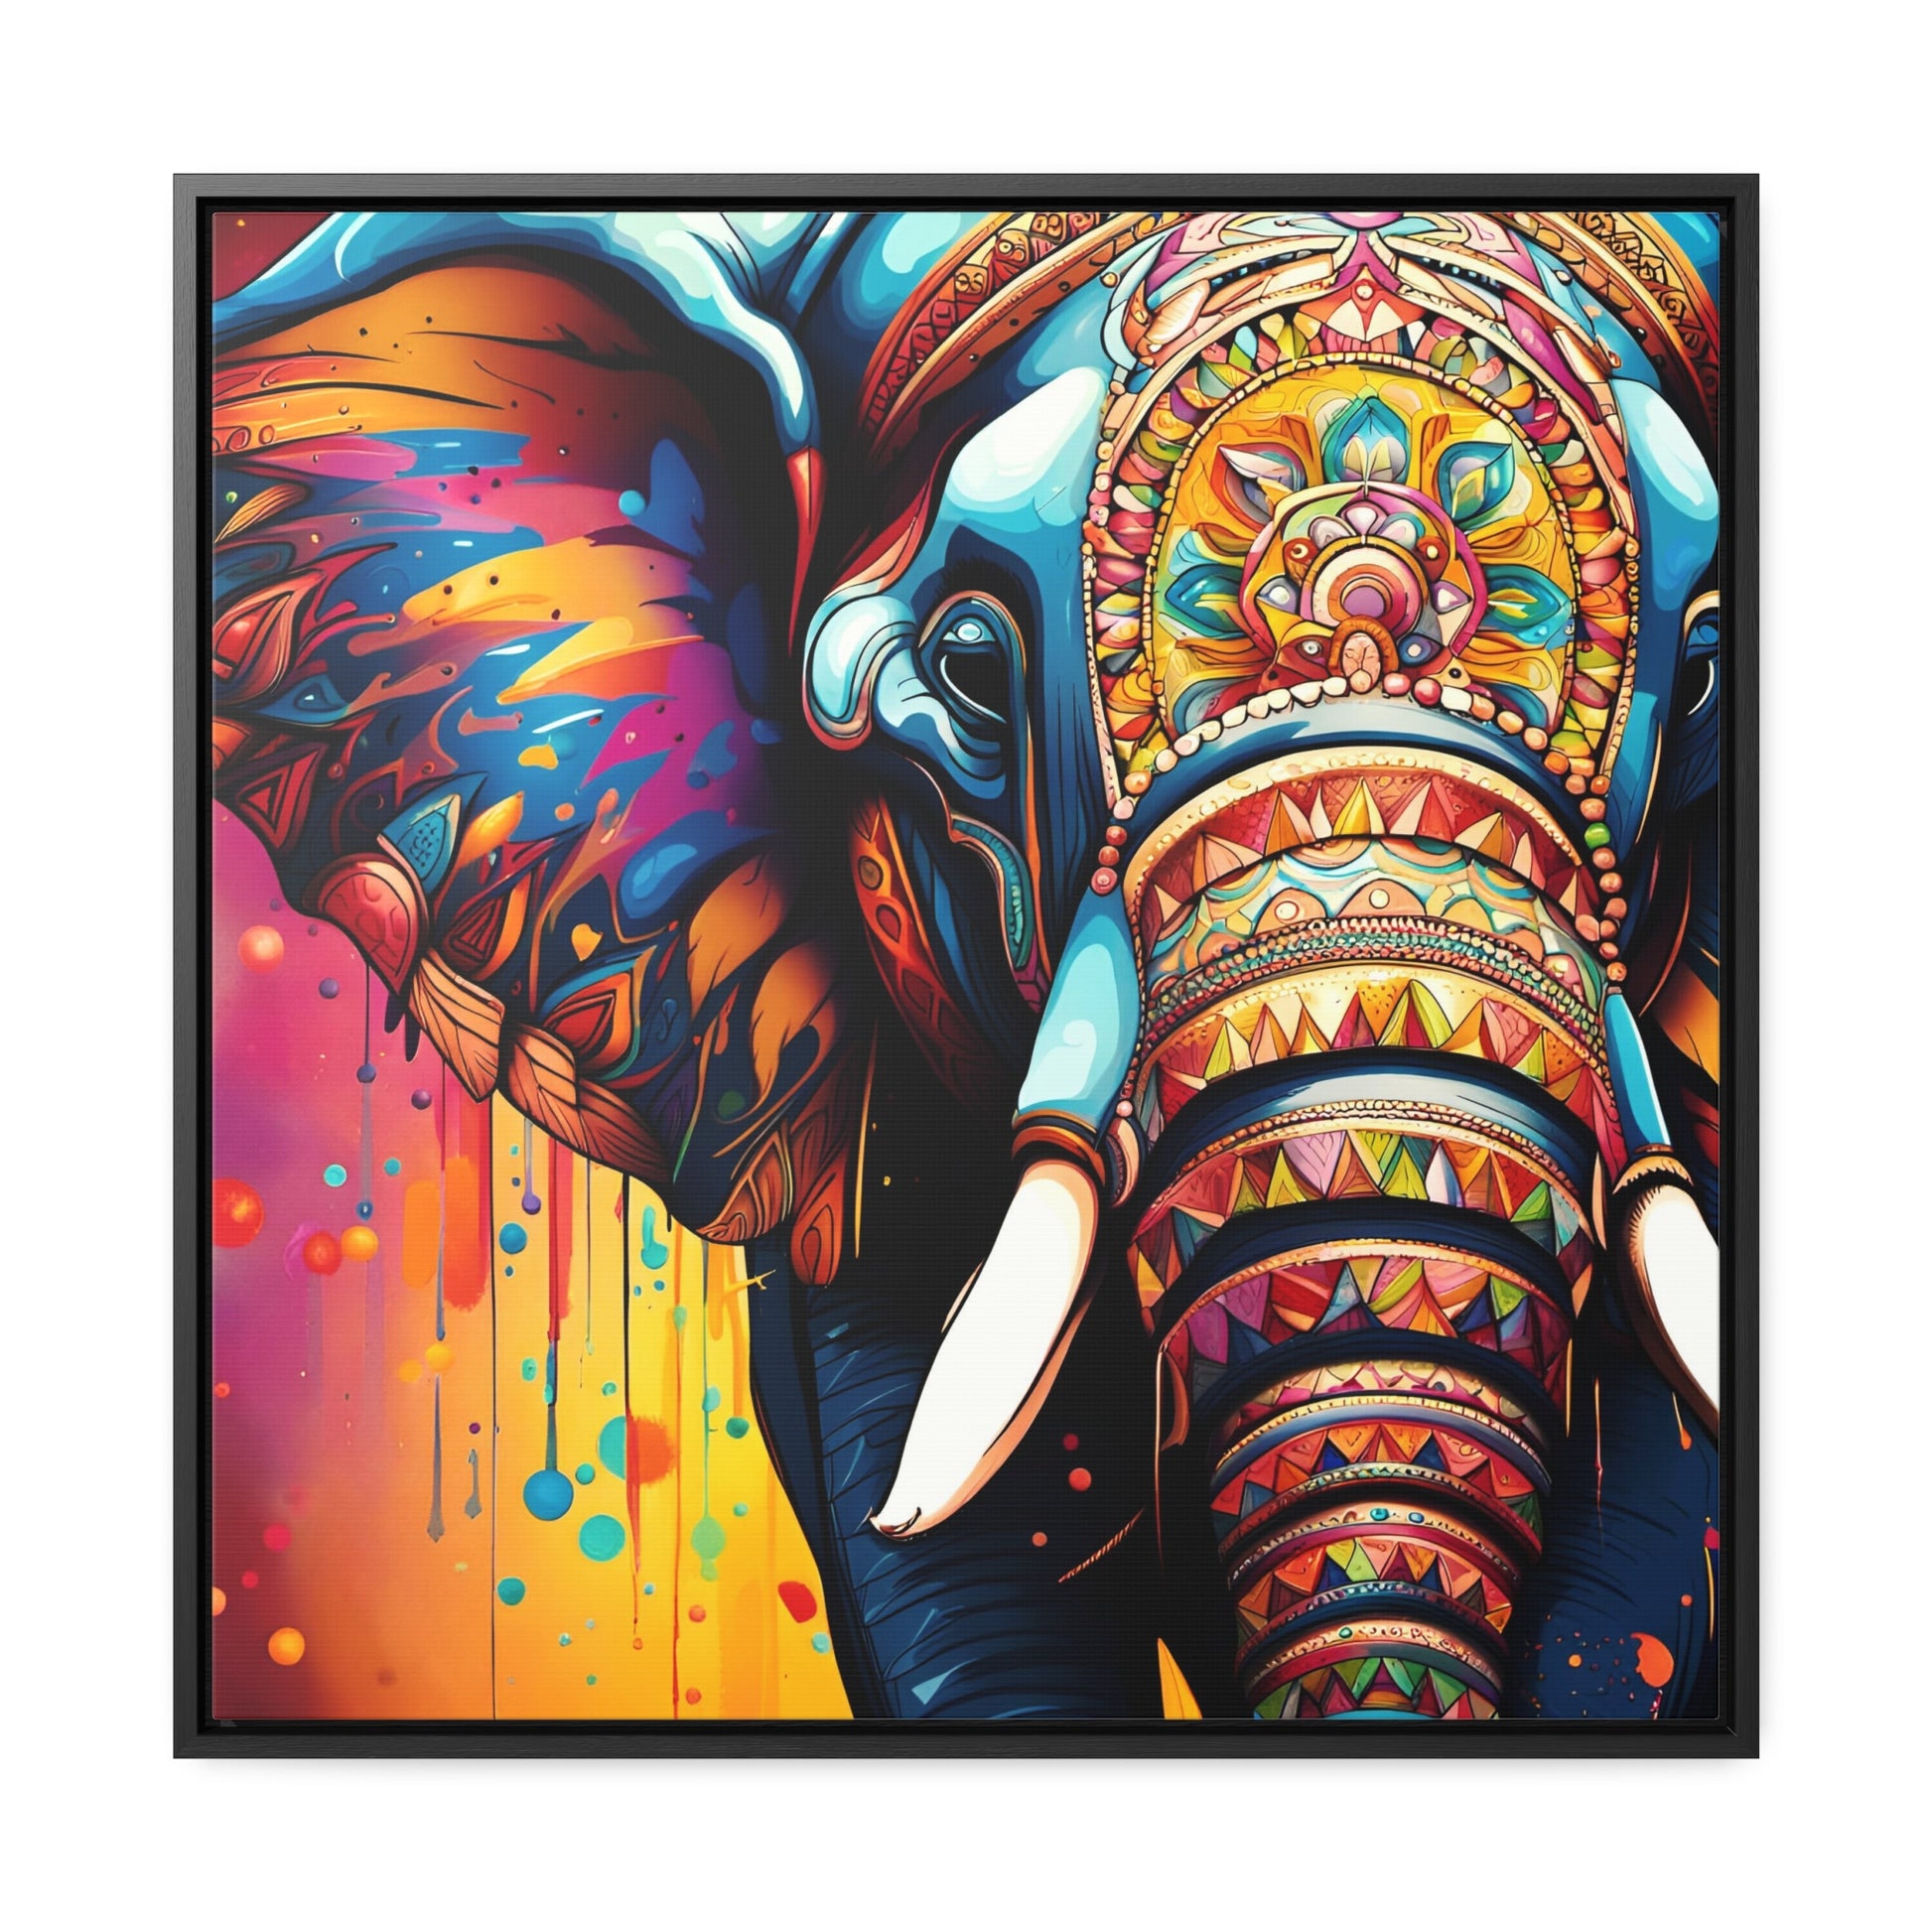 Stunning Multicolor Elephant Head Print on Canvas in a Floating Frame 36x36